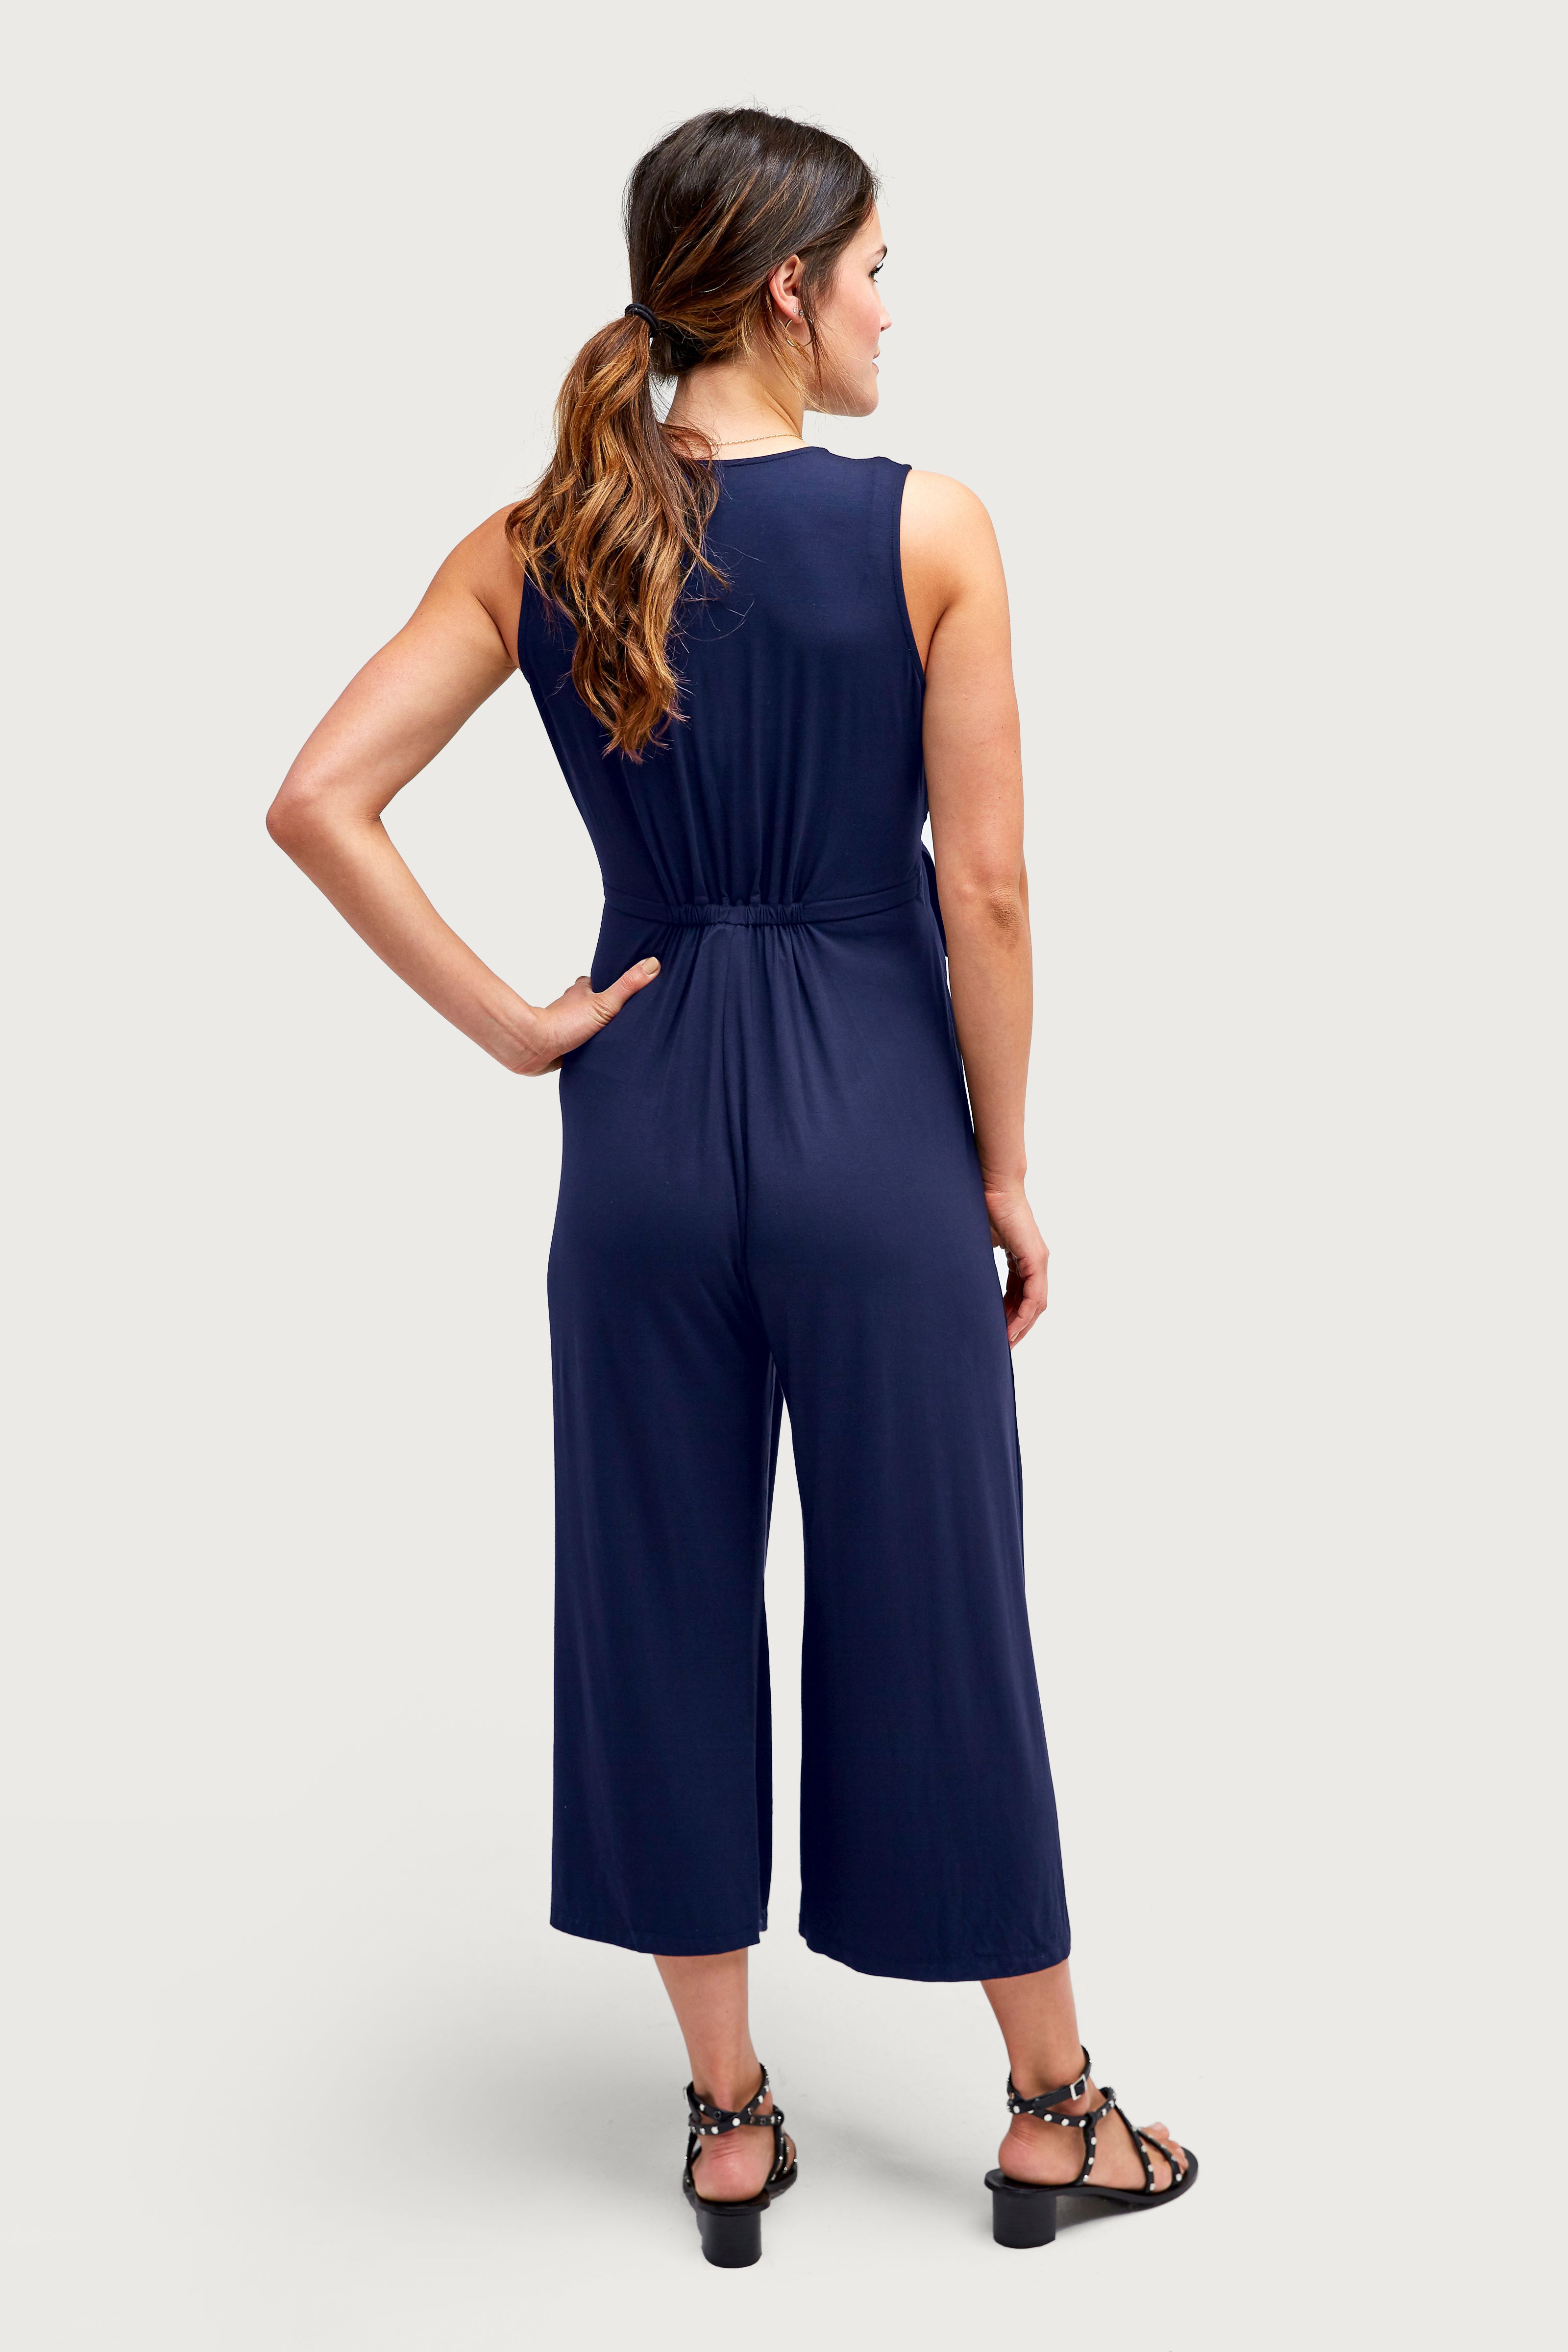 Maternity Jumpsuits – The Fourth